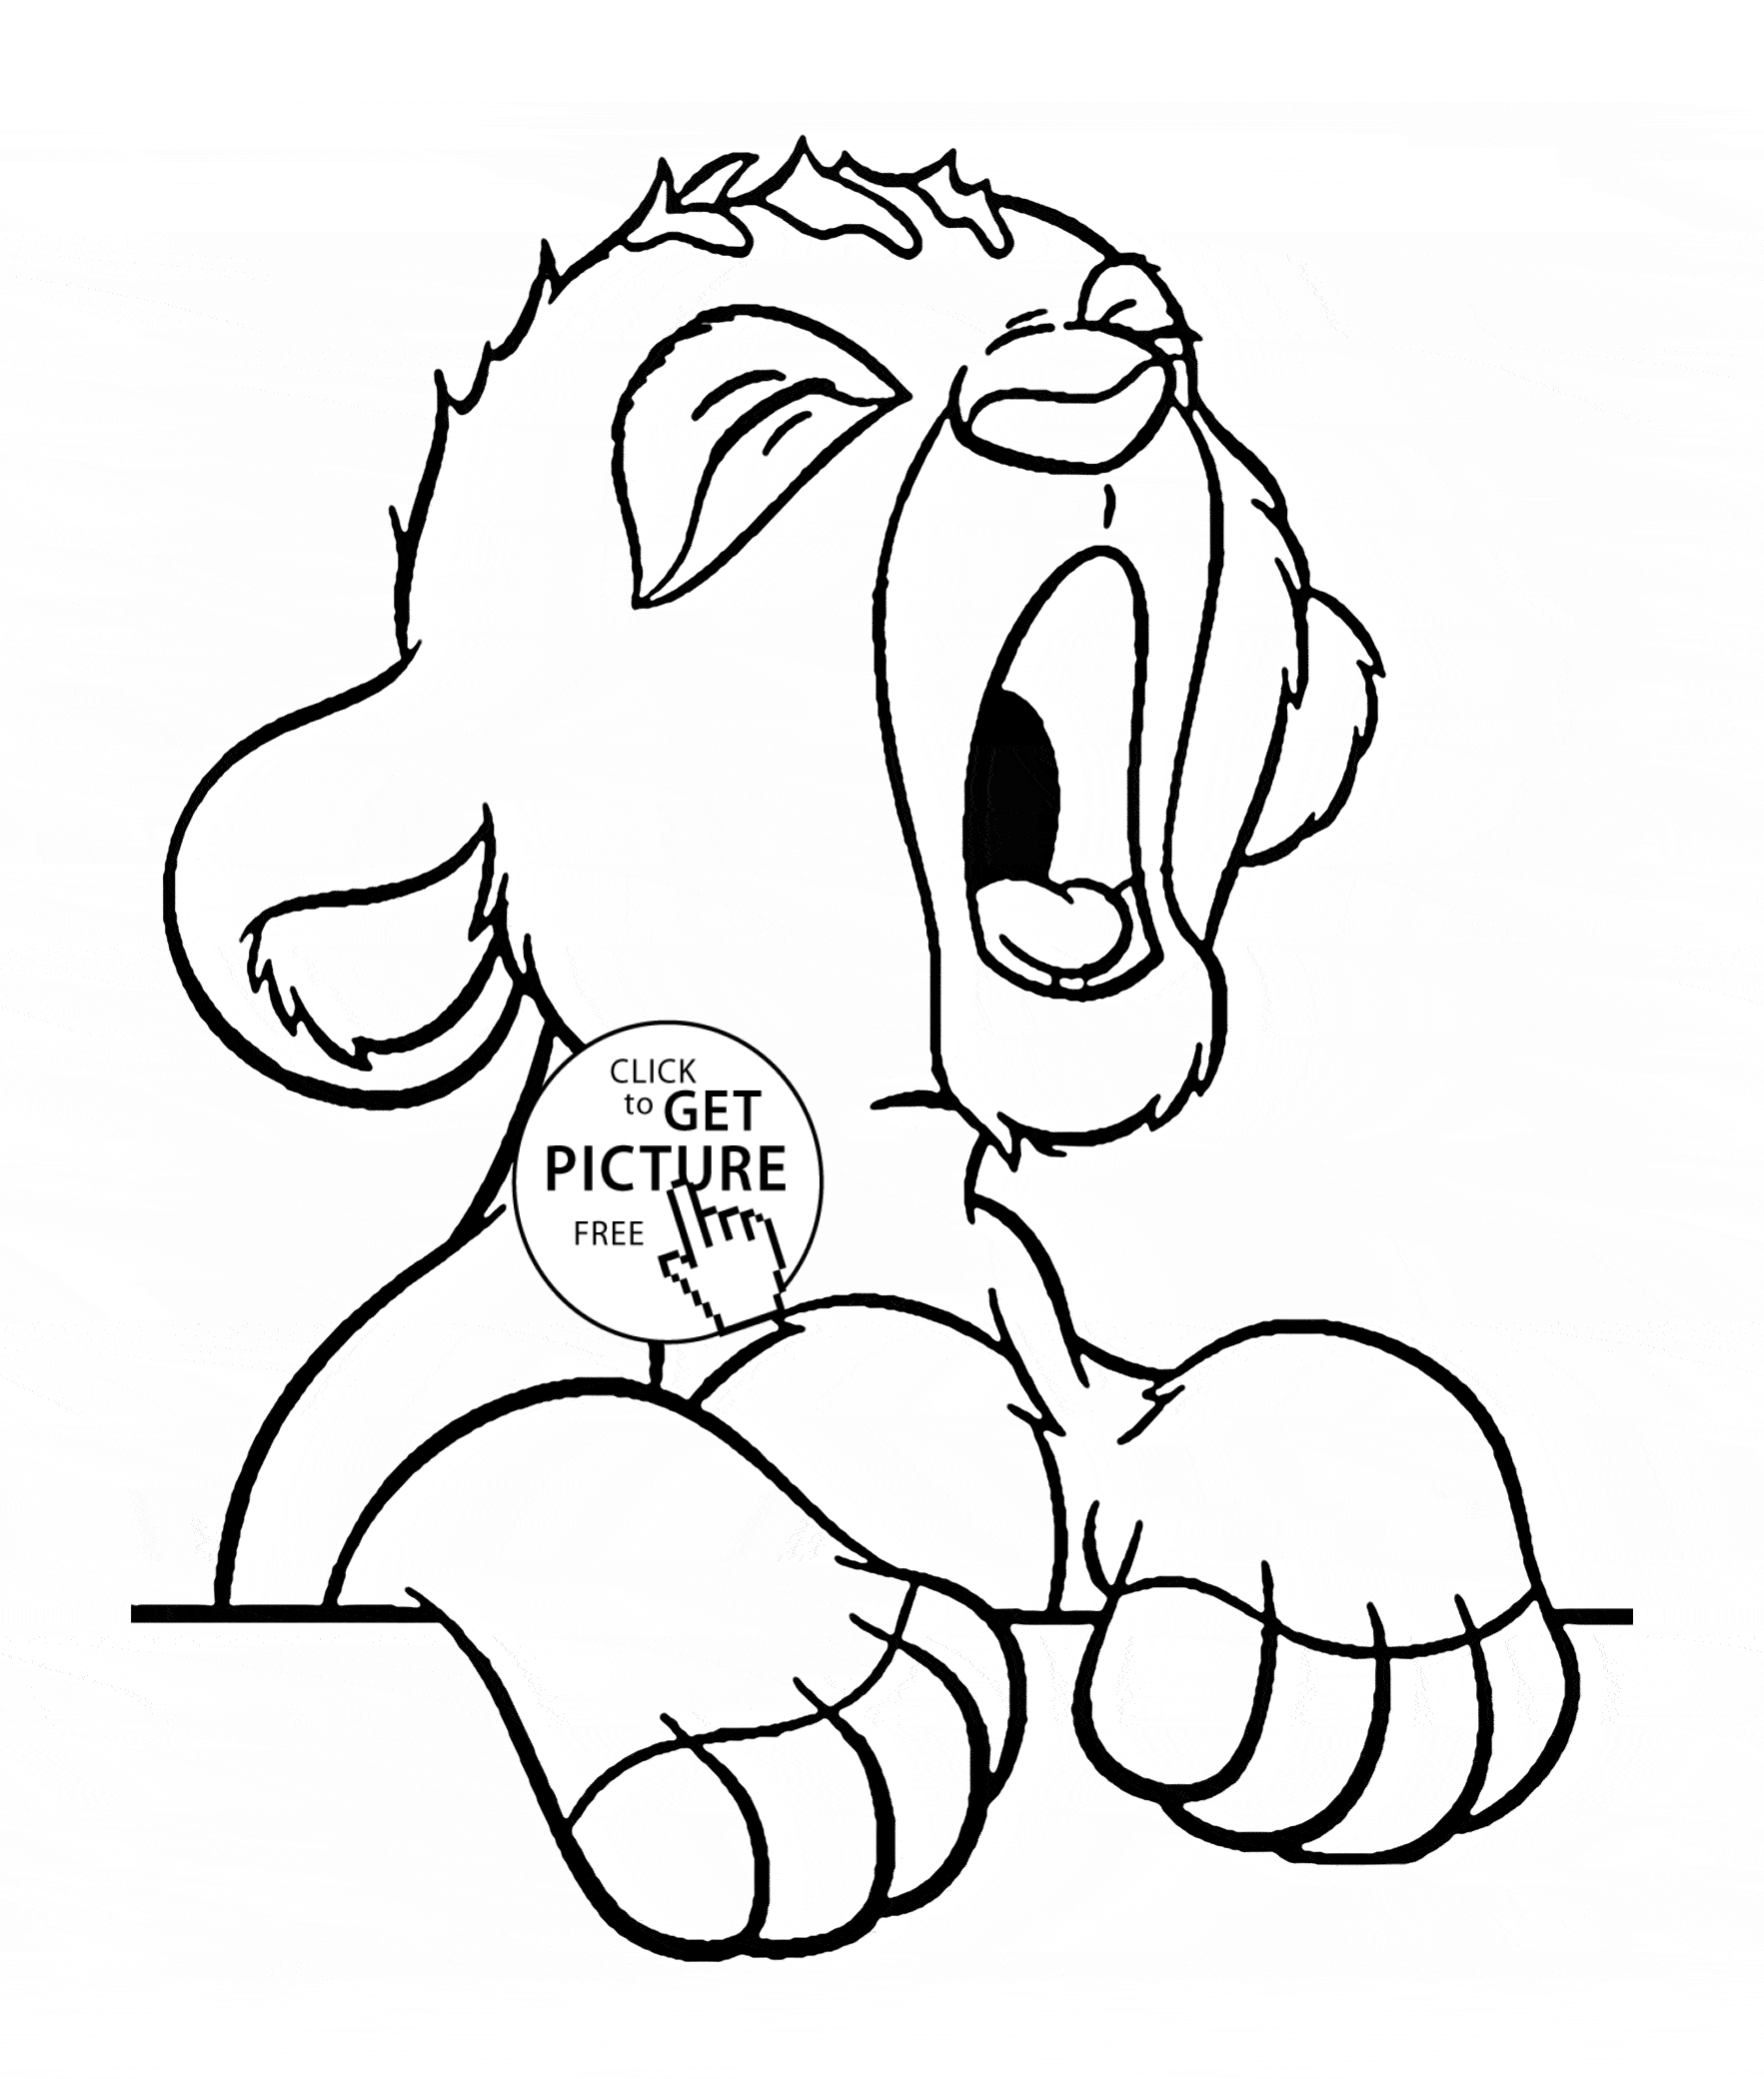 Funny baby Simba Lion coloring page for kids, animal coloring ...